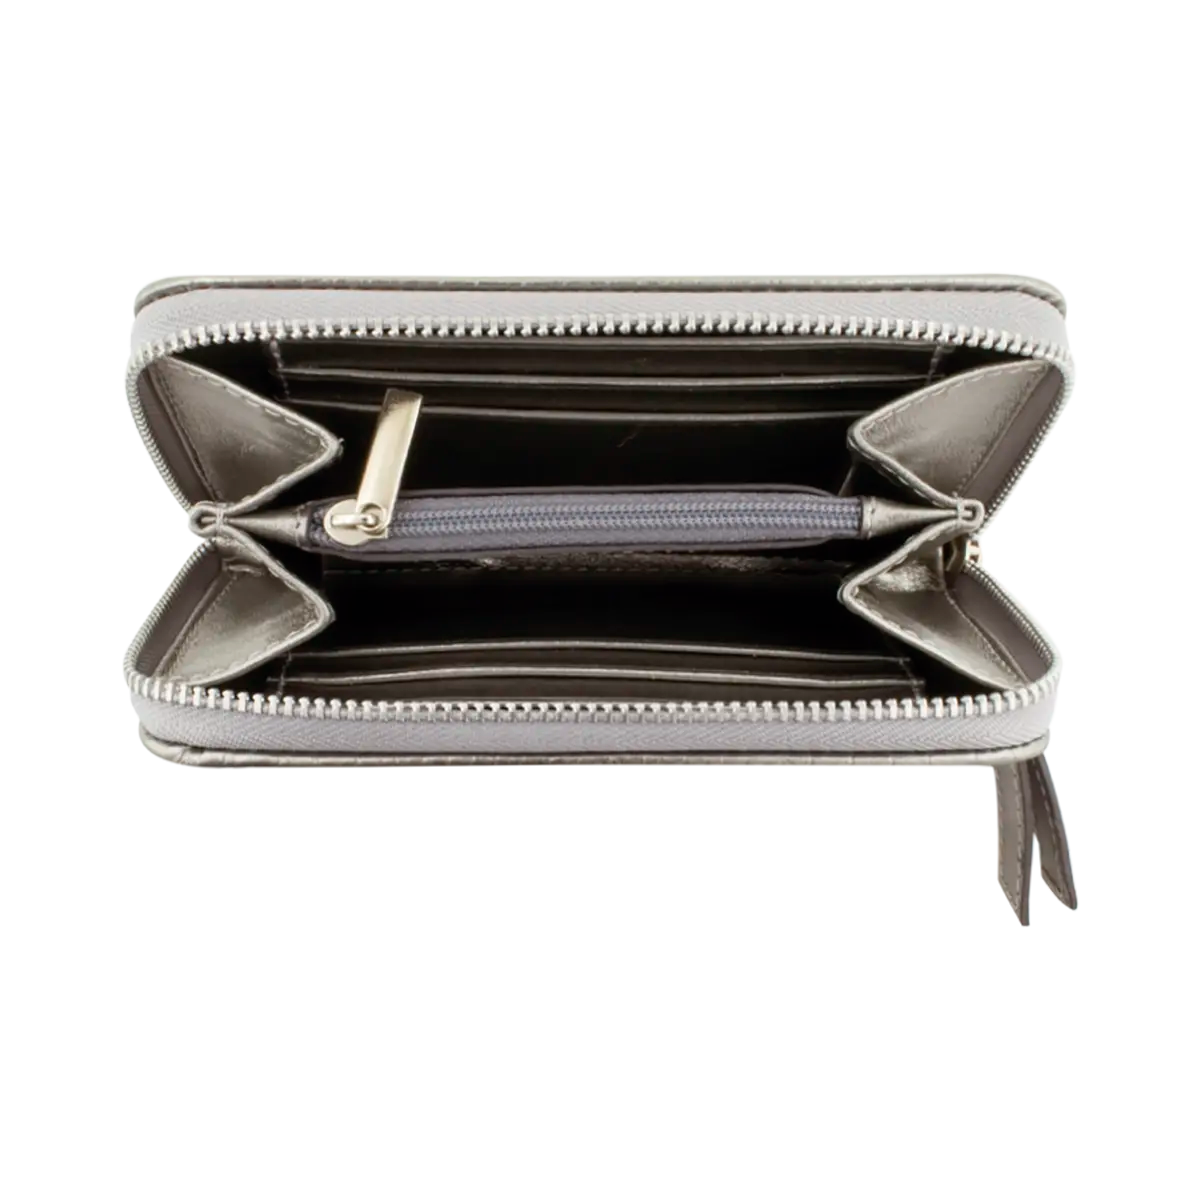 small silver print leather wallet. Fashion Accessories for women in San Diego, CA.